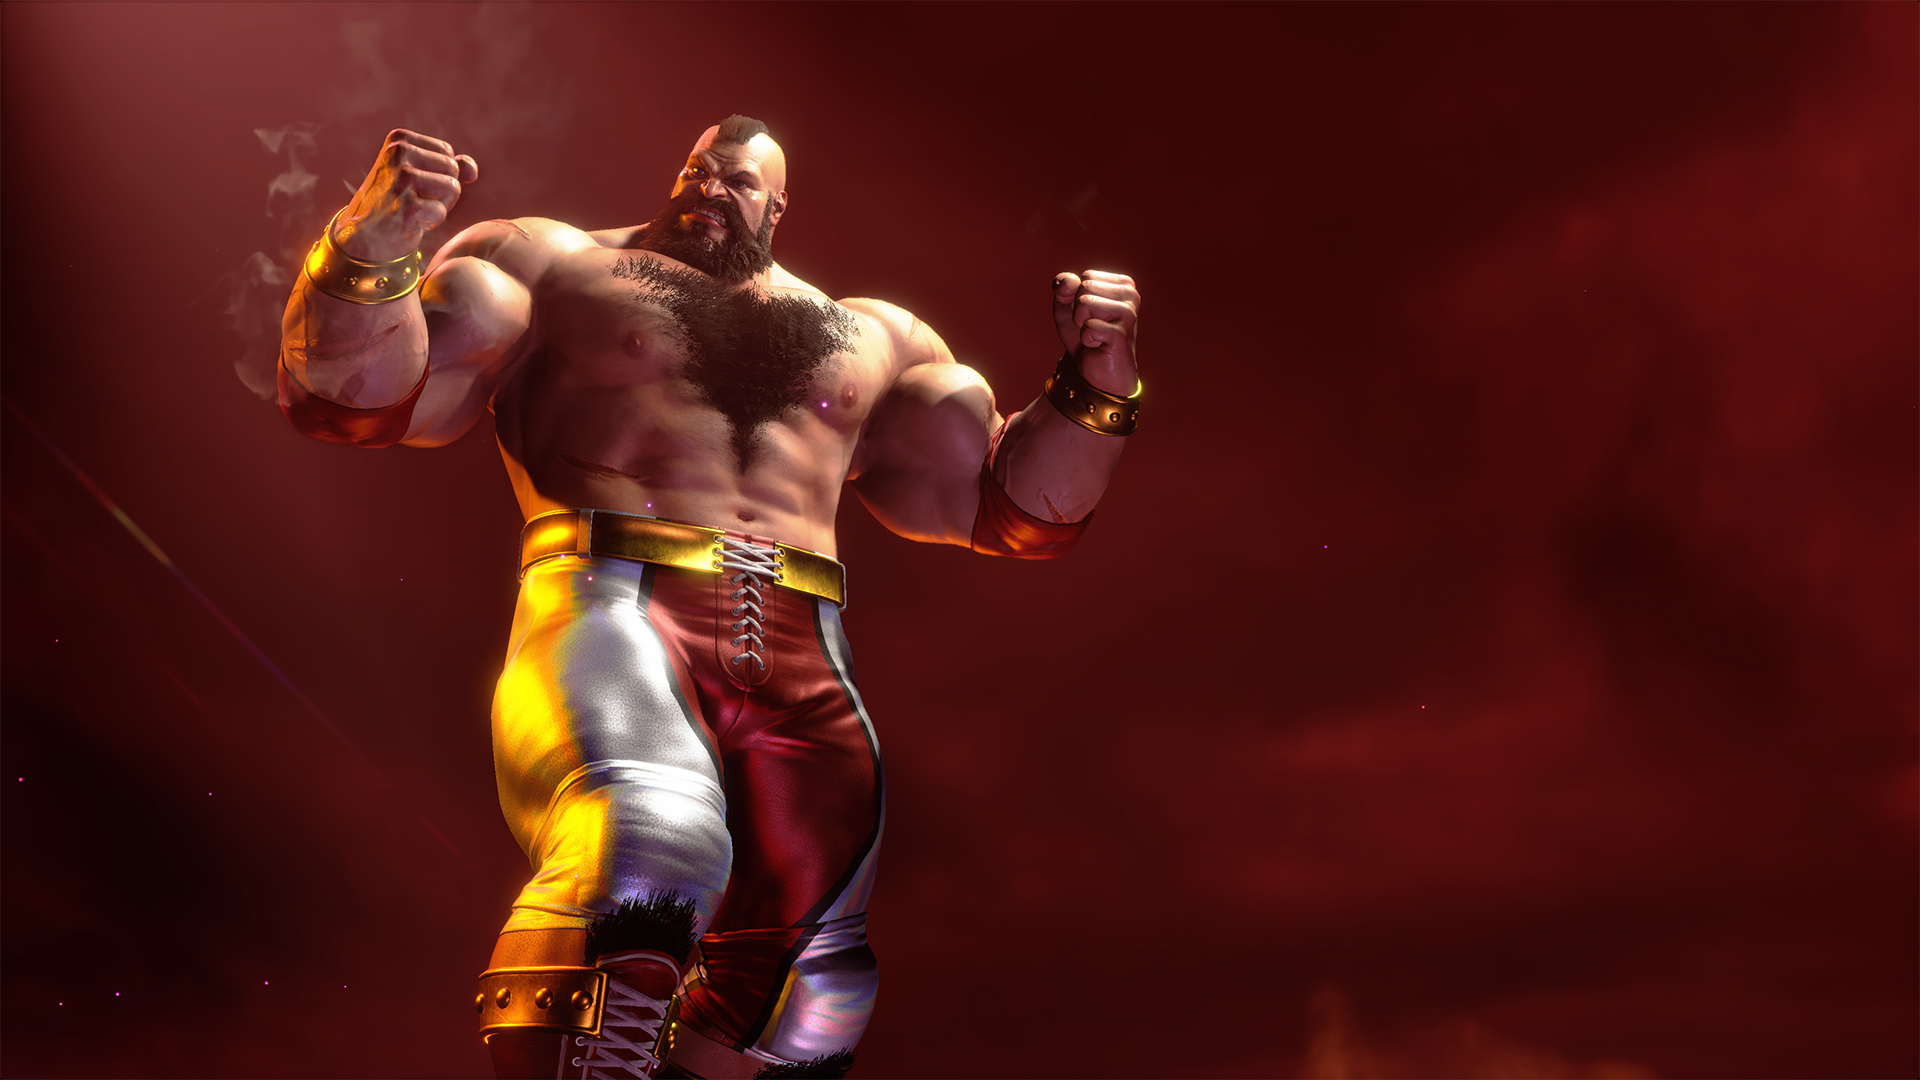 Zangief, Lily and Cammy gameplay revealed for Street Fighter 6 launch  roster